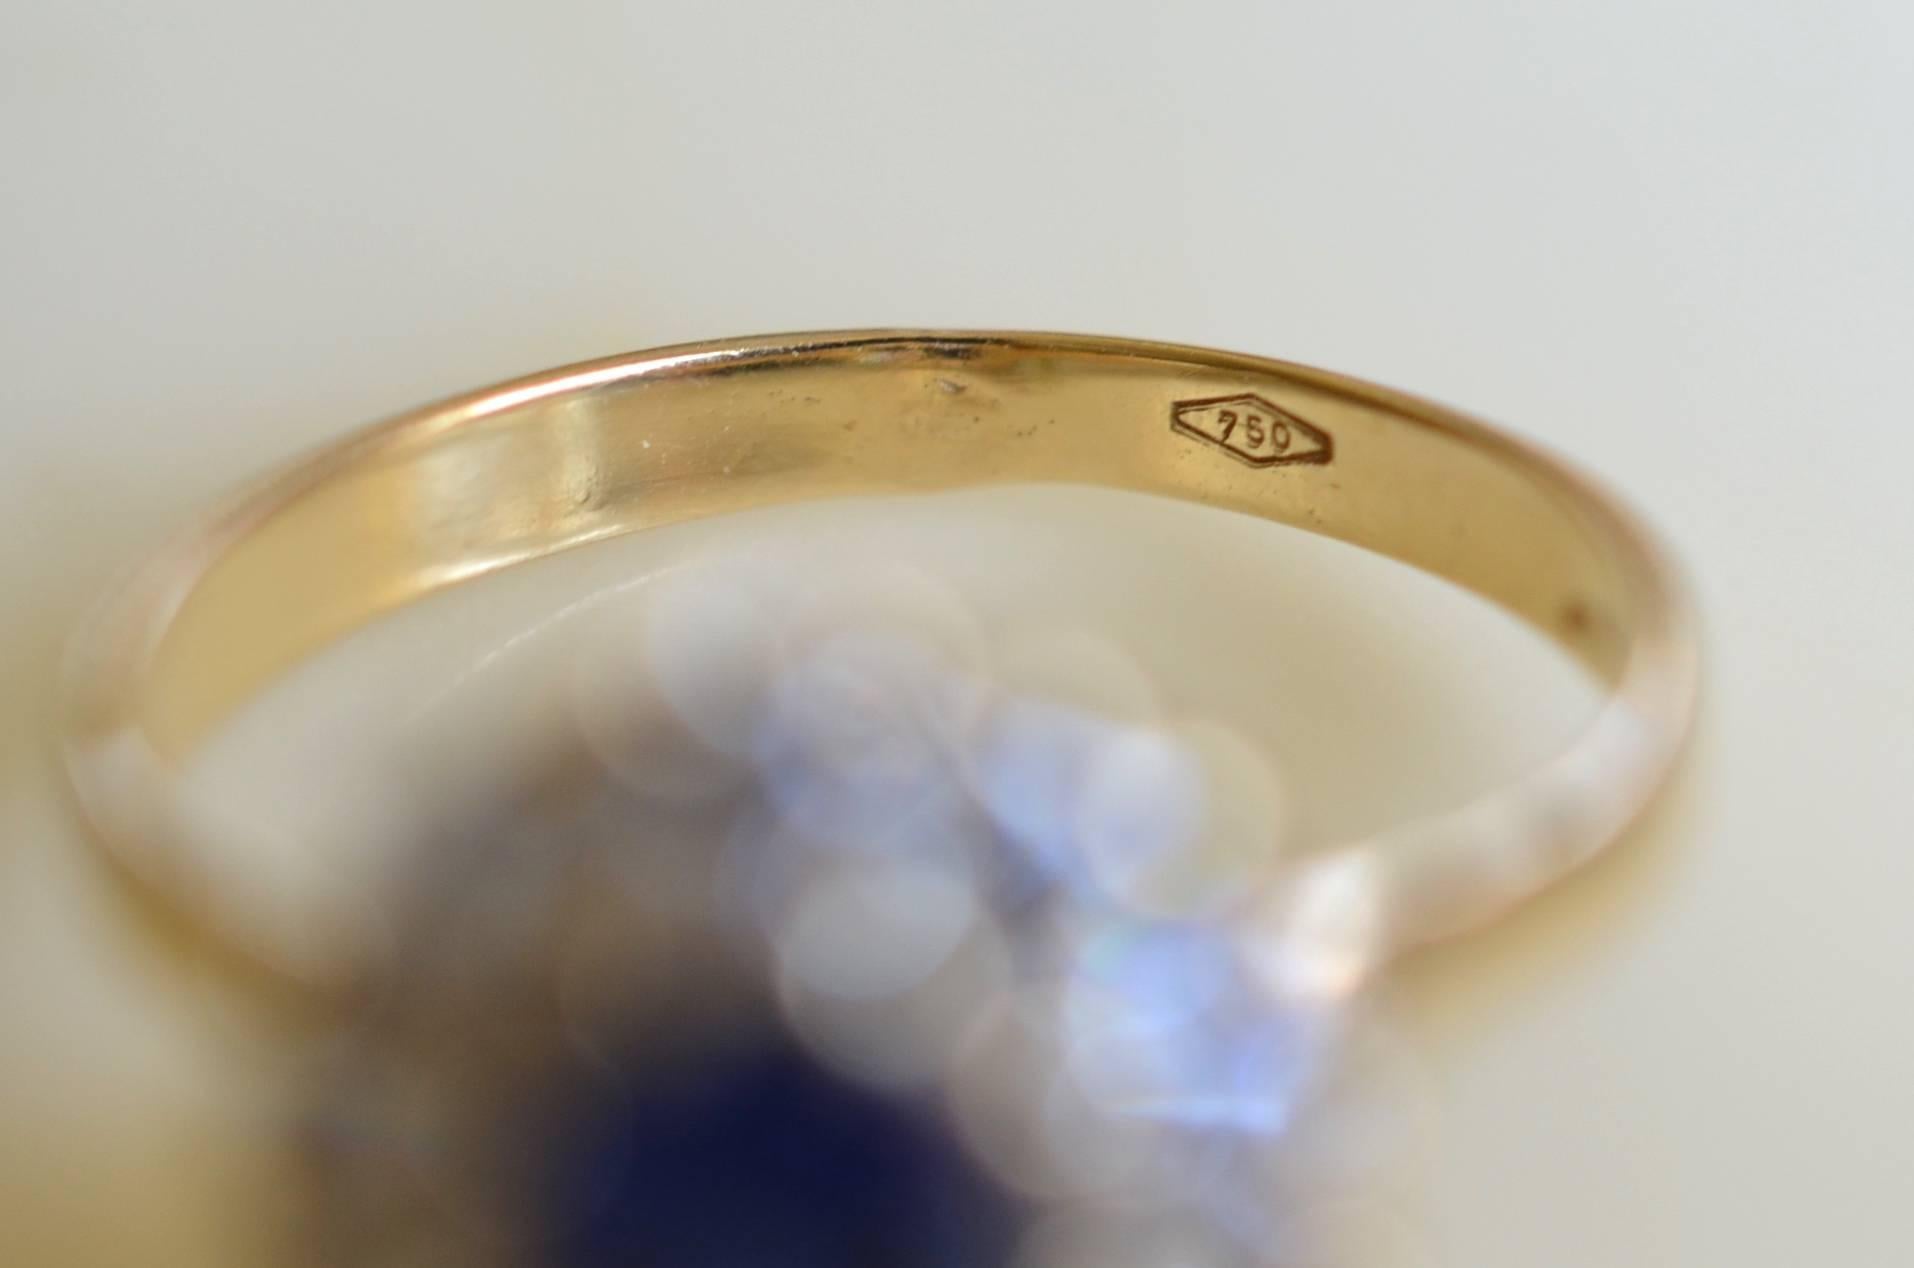 Sumptuous 18-karat gold daisy ring with oval shape blue sapphire surrounded with whites sapphires.
Classic shape enriched by luminous stones.
Jewel in very good conditions of the 1950s.

Size: 56 (18.1 mm)
Size of the center sapphire: 7.5mm x